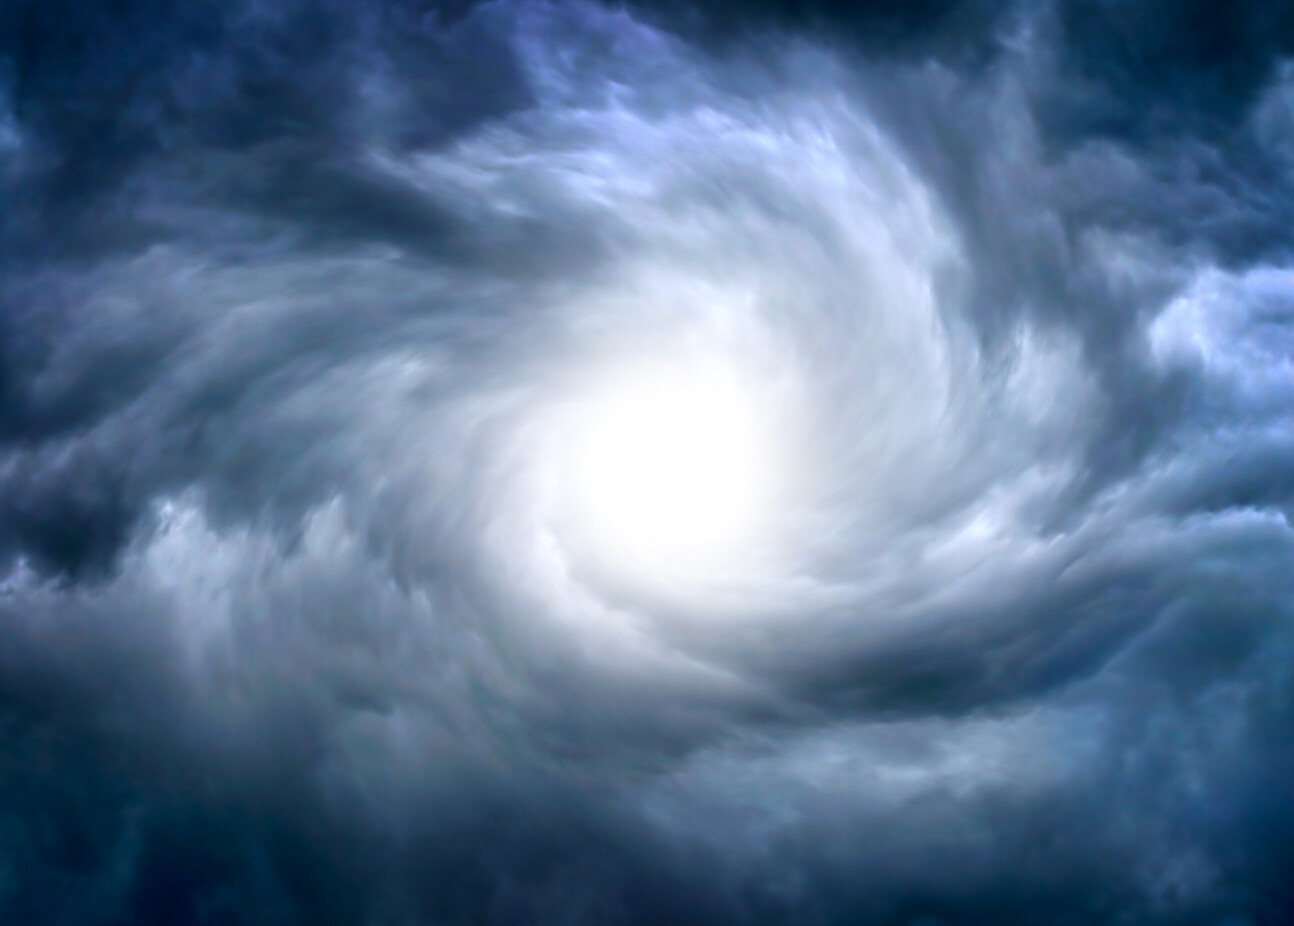 An image that depicts cloud turbulance